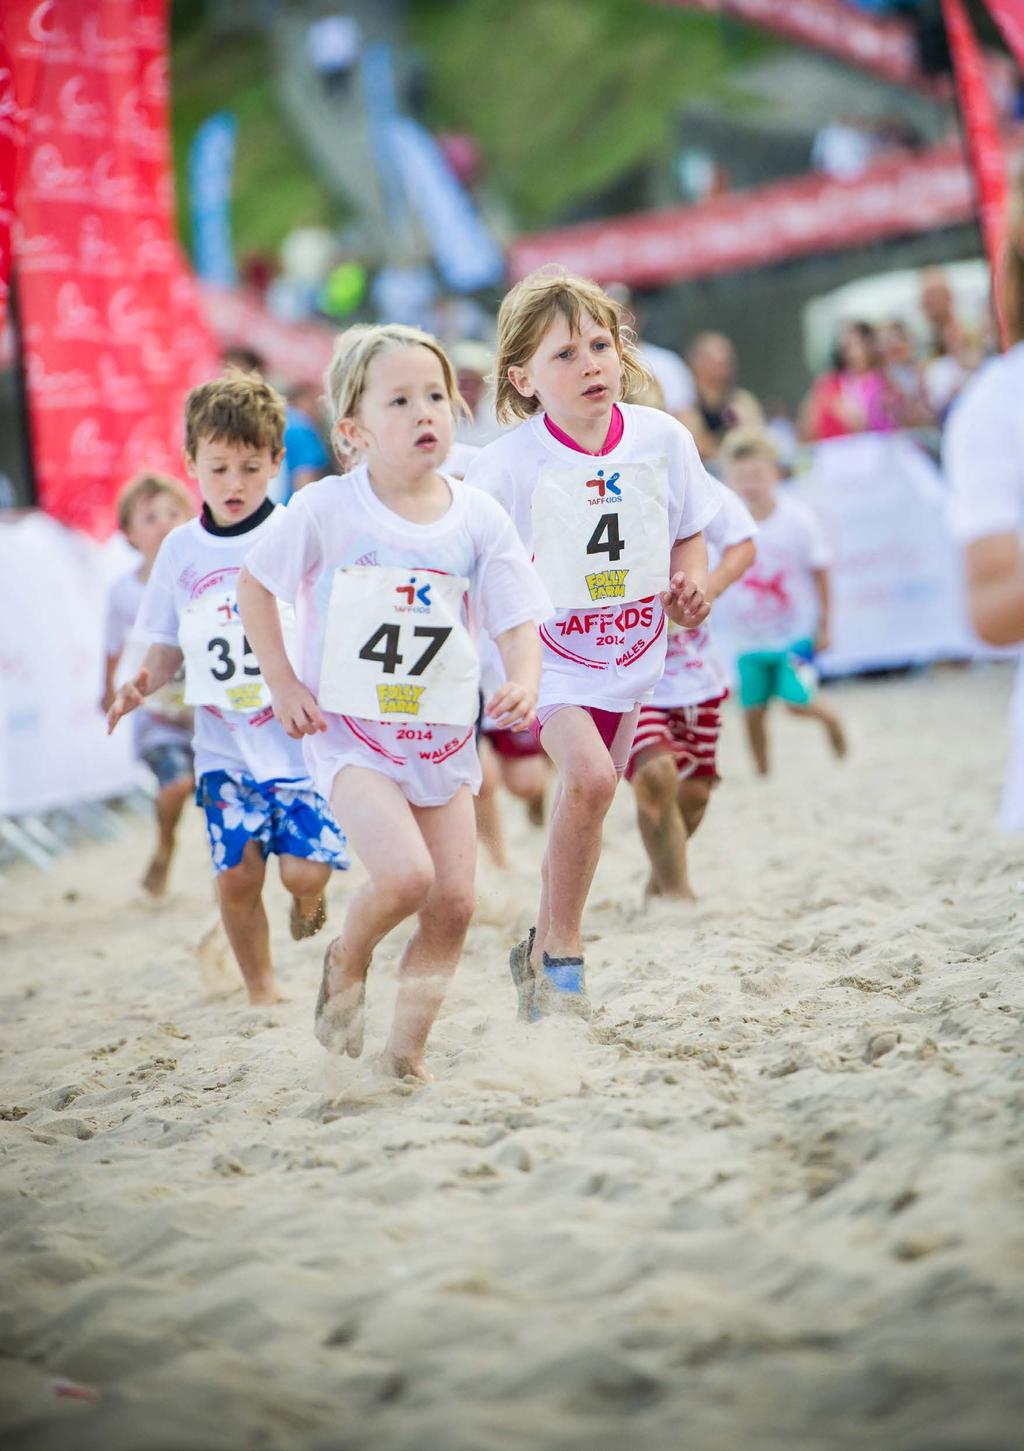 FOLLY FARM TAFF KIDS FRIDAY 8 JULY 2016 NORTH BEACH, TENBY Swim (Surf Run) - 30m (All children) Run - 200m (4-5 years), 400m (6-11 yrs) The opening event of the Long Course Weekend in Tenby, Taff